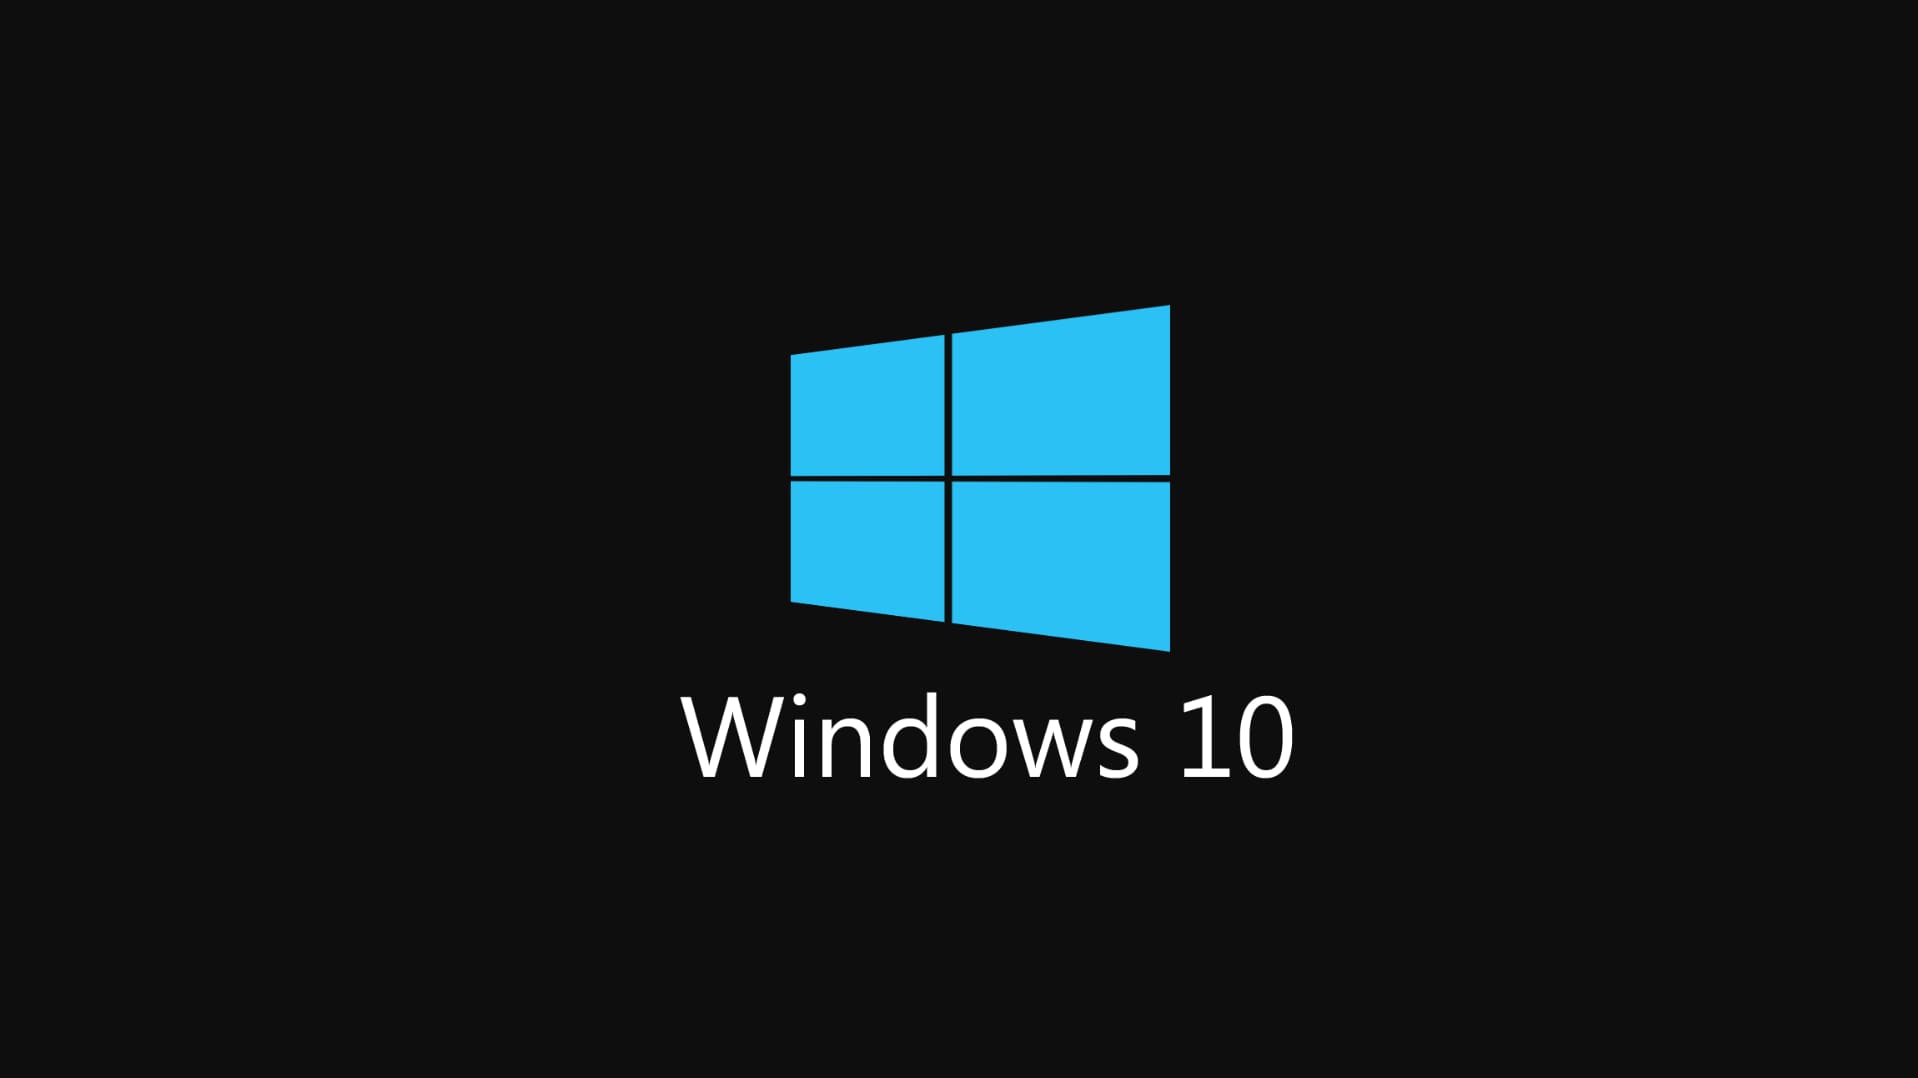 Windows 10 1903 May 2019 Update is now available